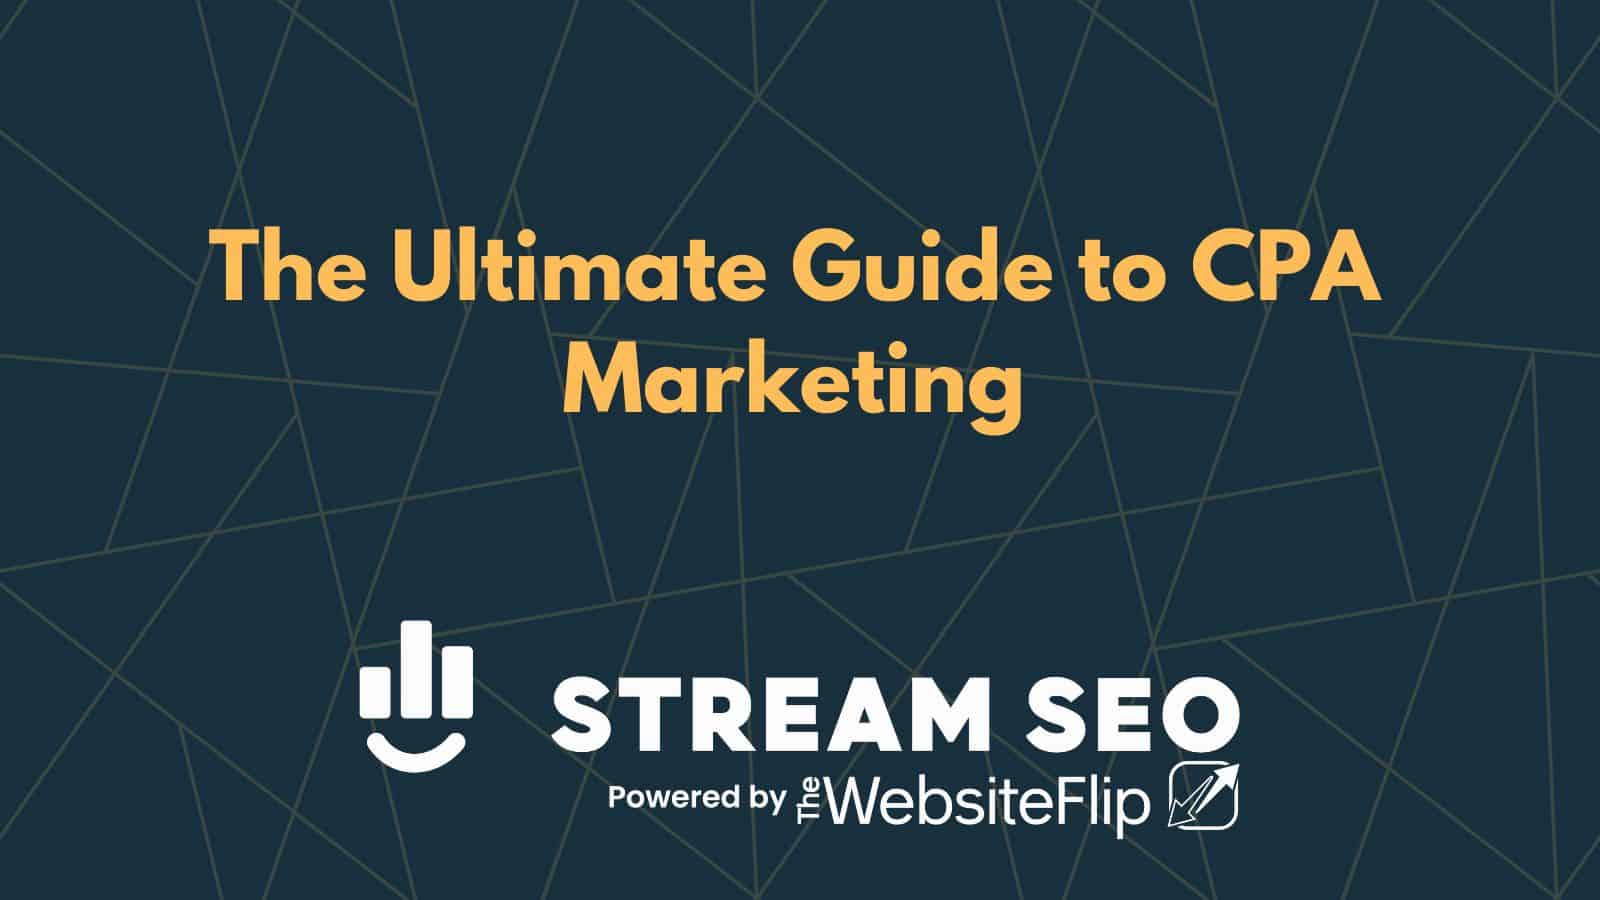 The Ultimate Guide to CPA Marketing